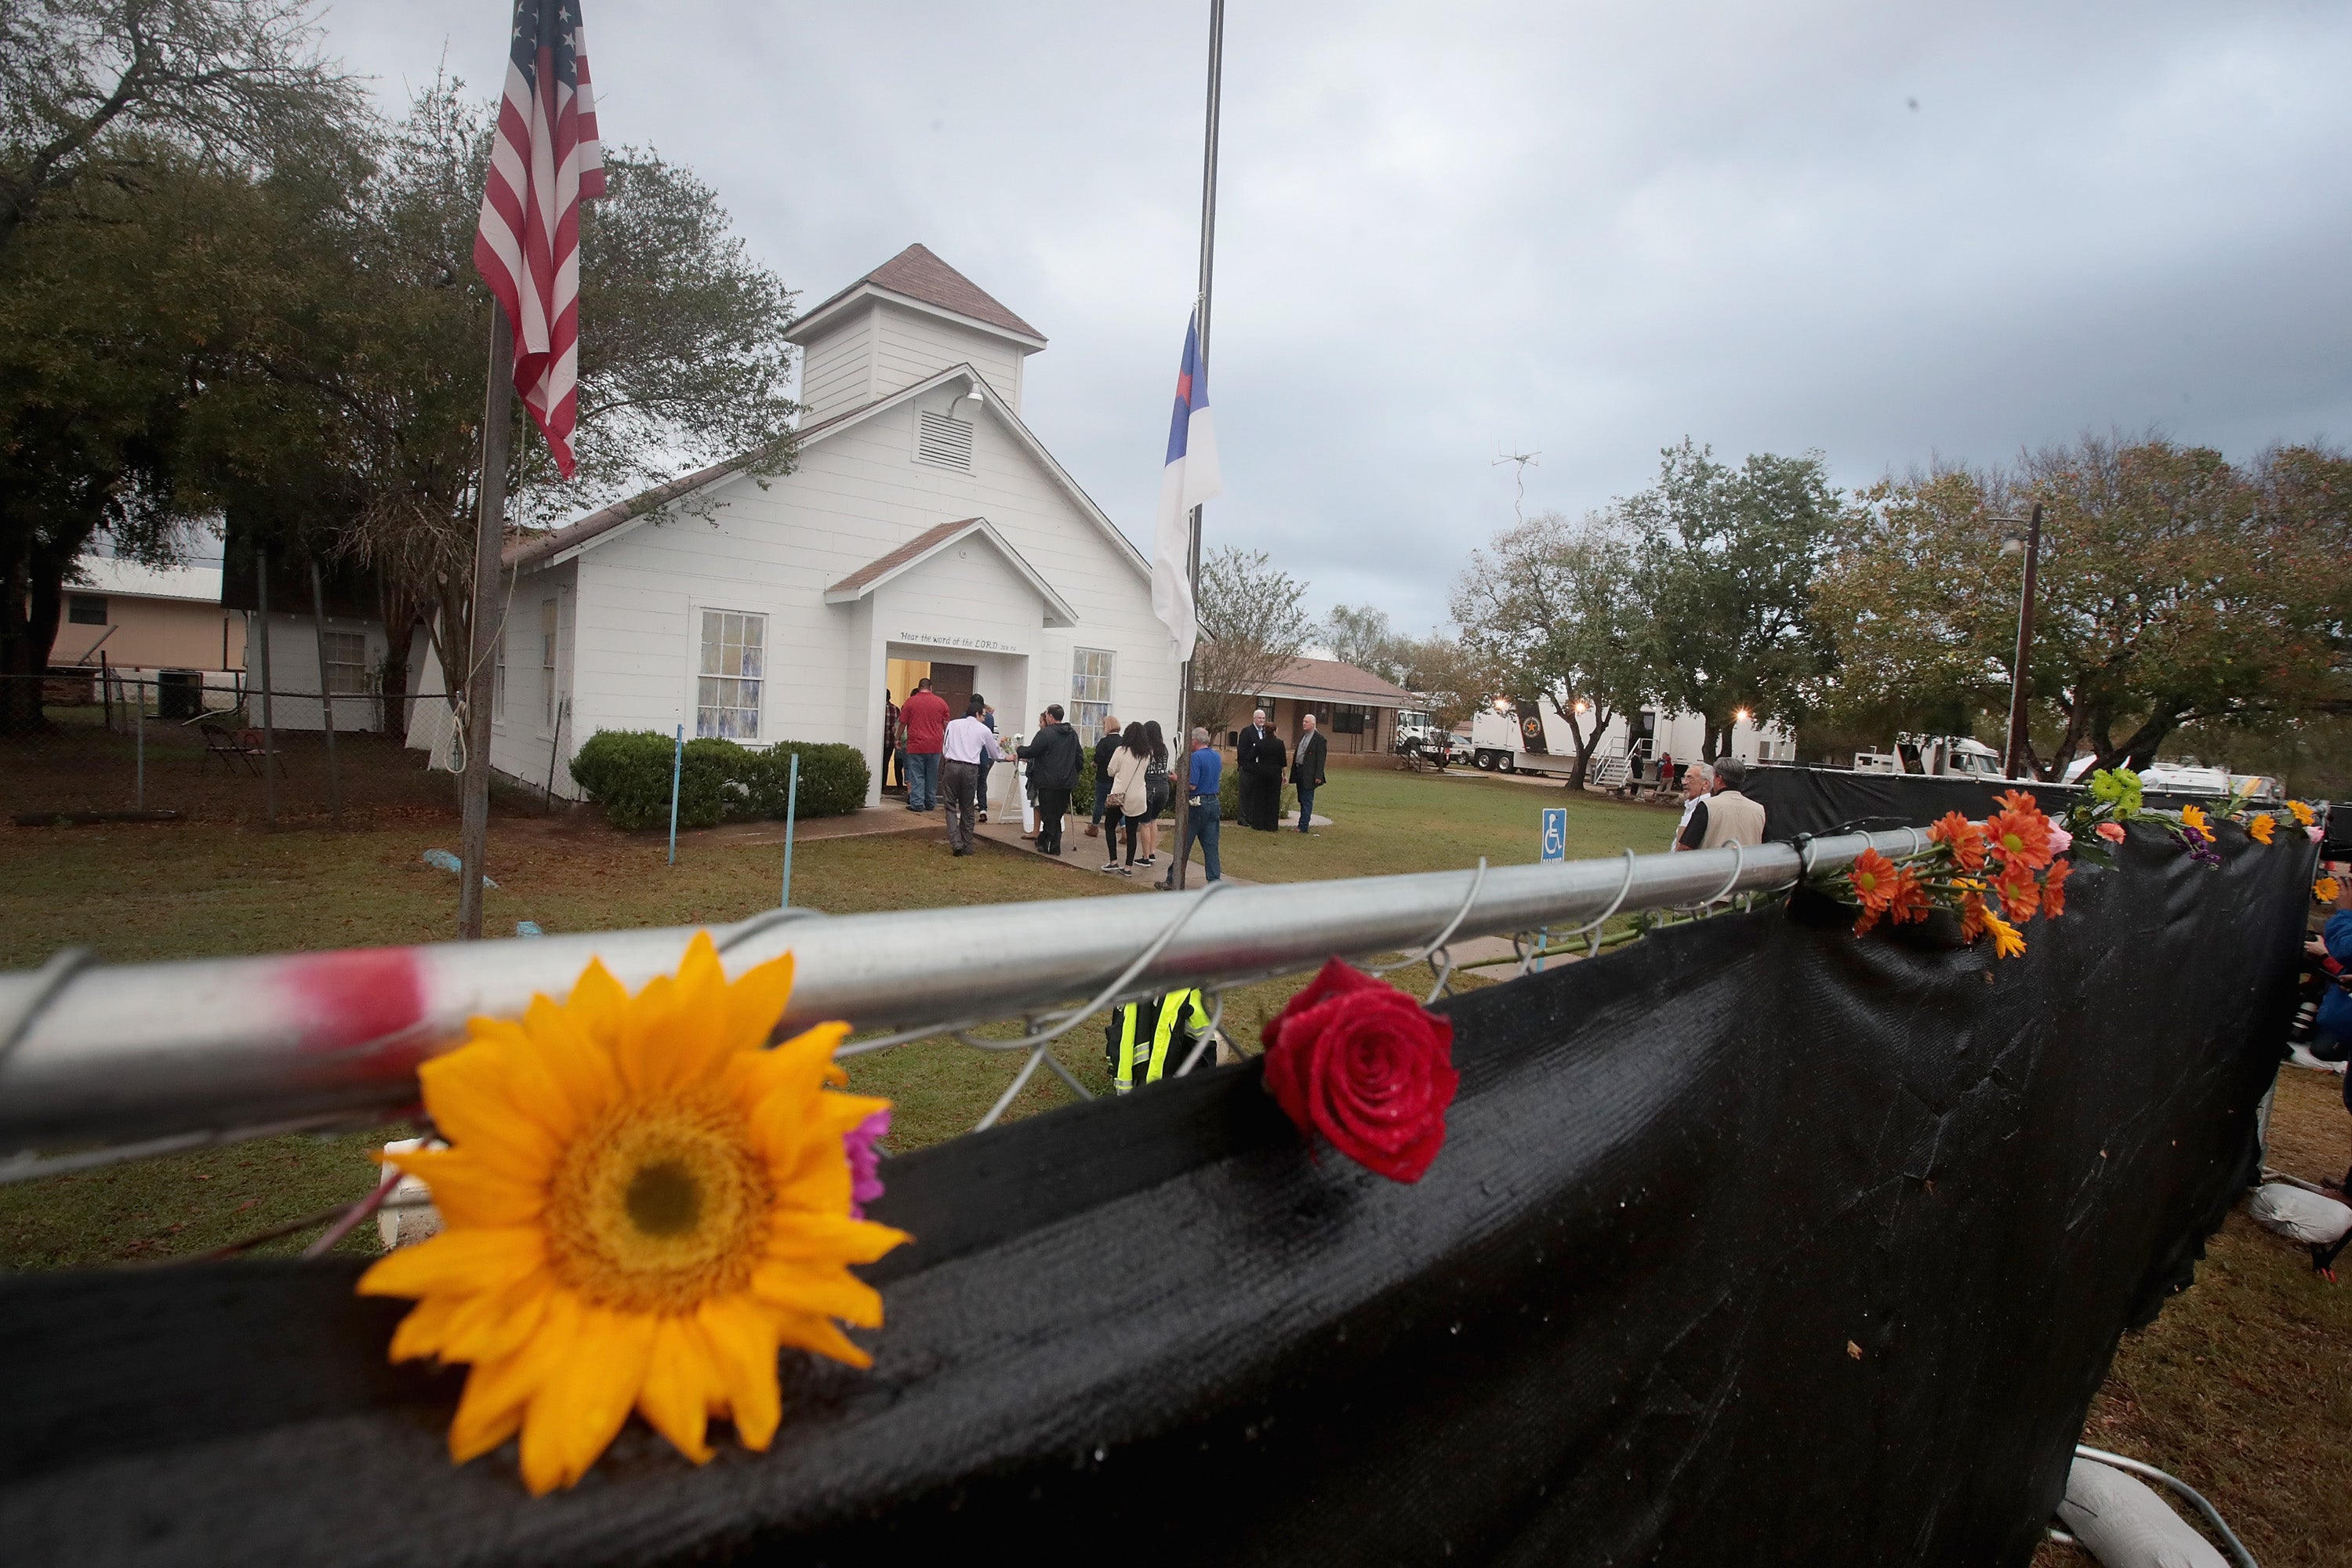 Visitors tour the First Baptist Church of Sutherland Springs after it was turned into a memorial to honor those who died on 12 November, 2017 in Sutherland Springs, Texas.